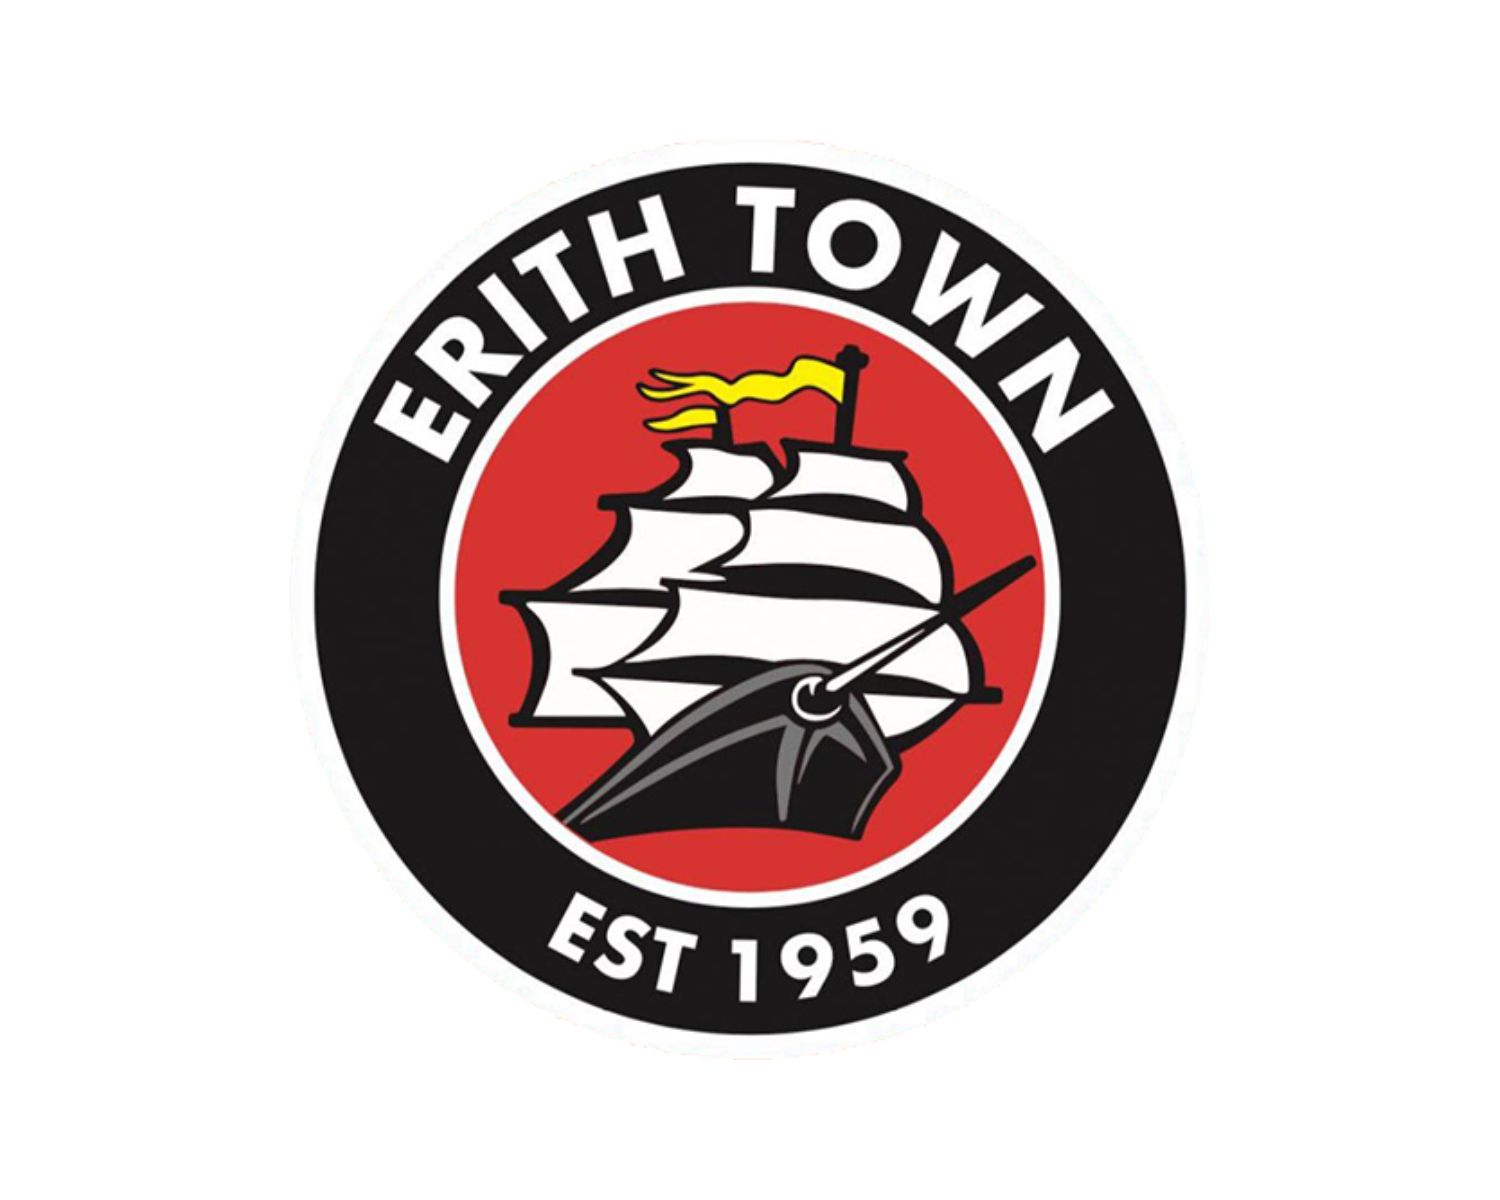 erith-town-fc-23-football-club-facts